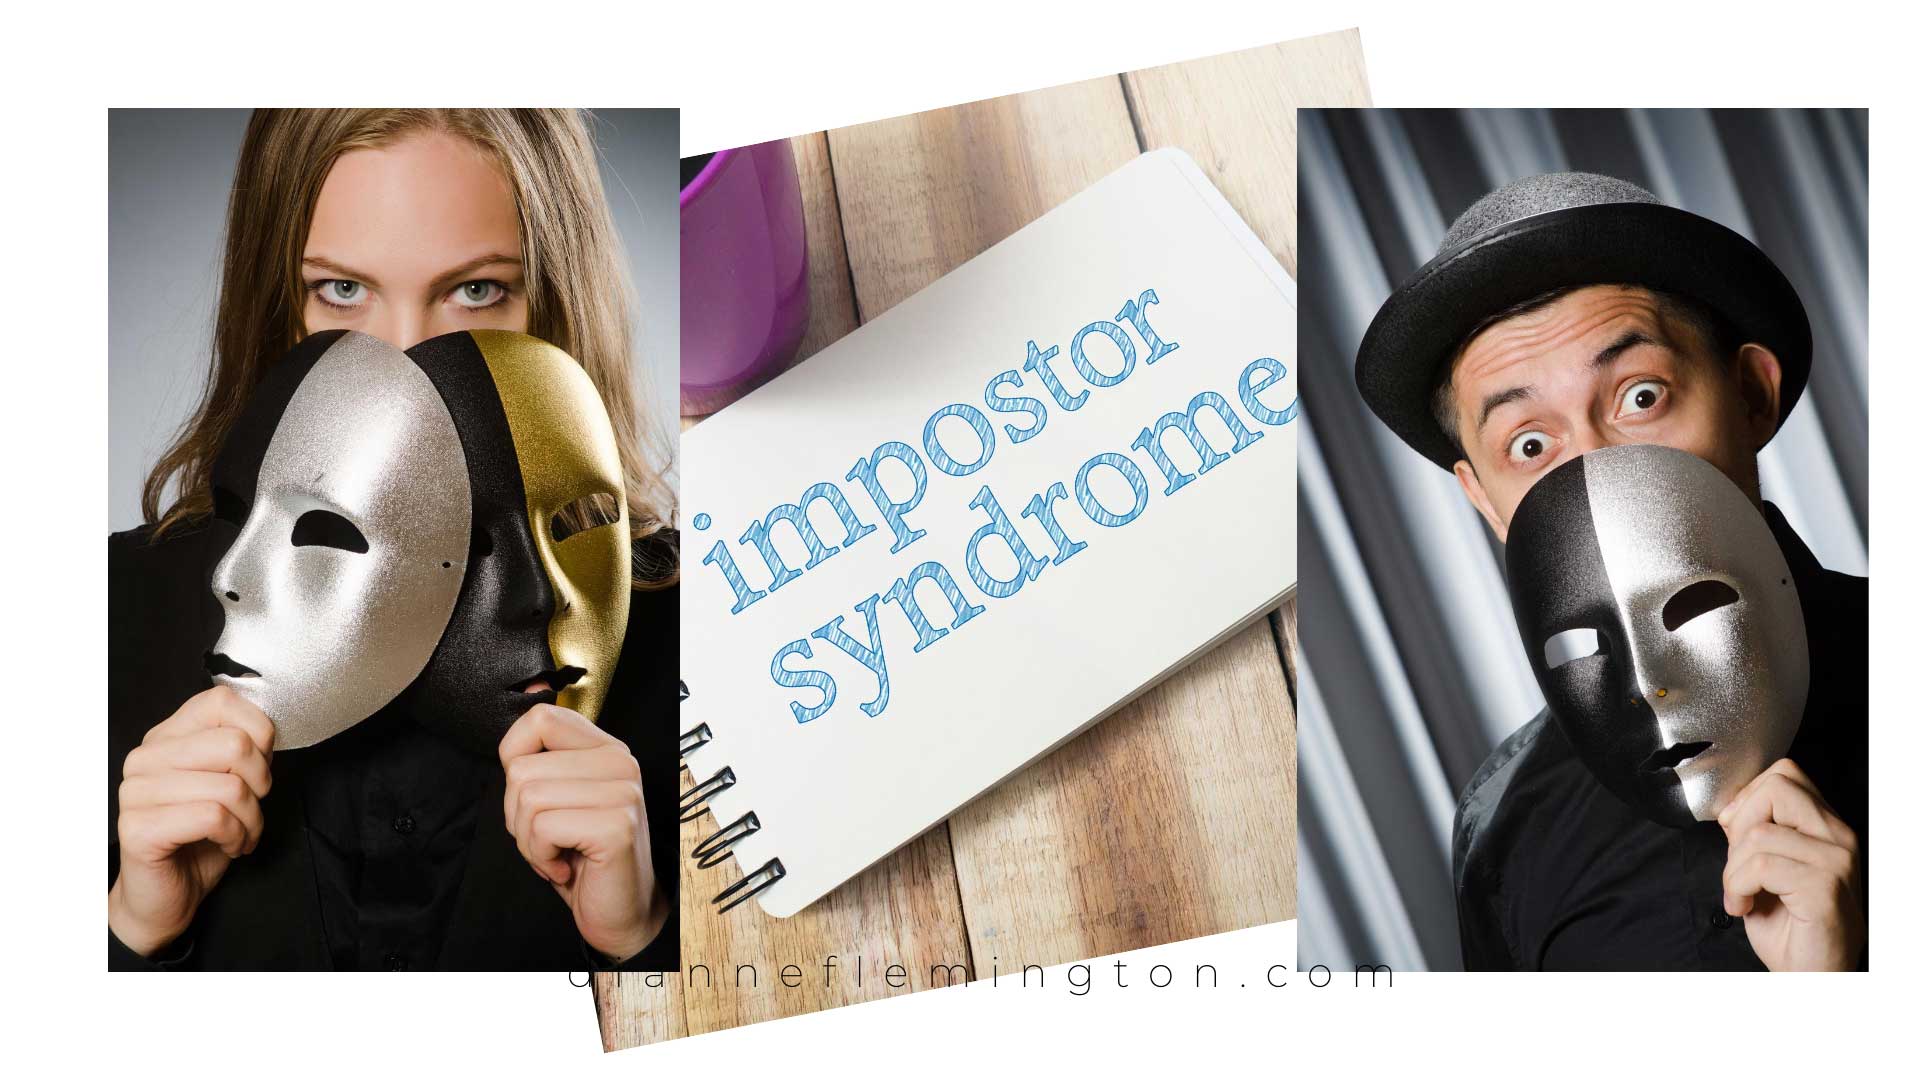 IMPOSTER SYNDROME: Shining Light on a Dark Experience